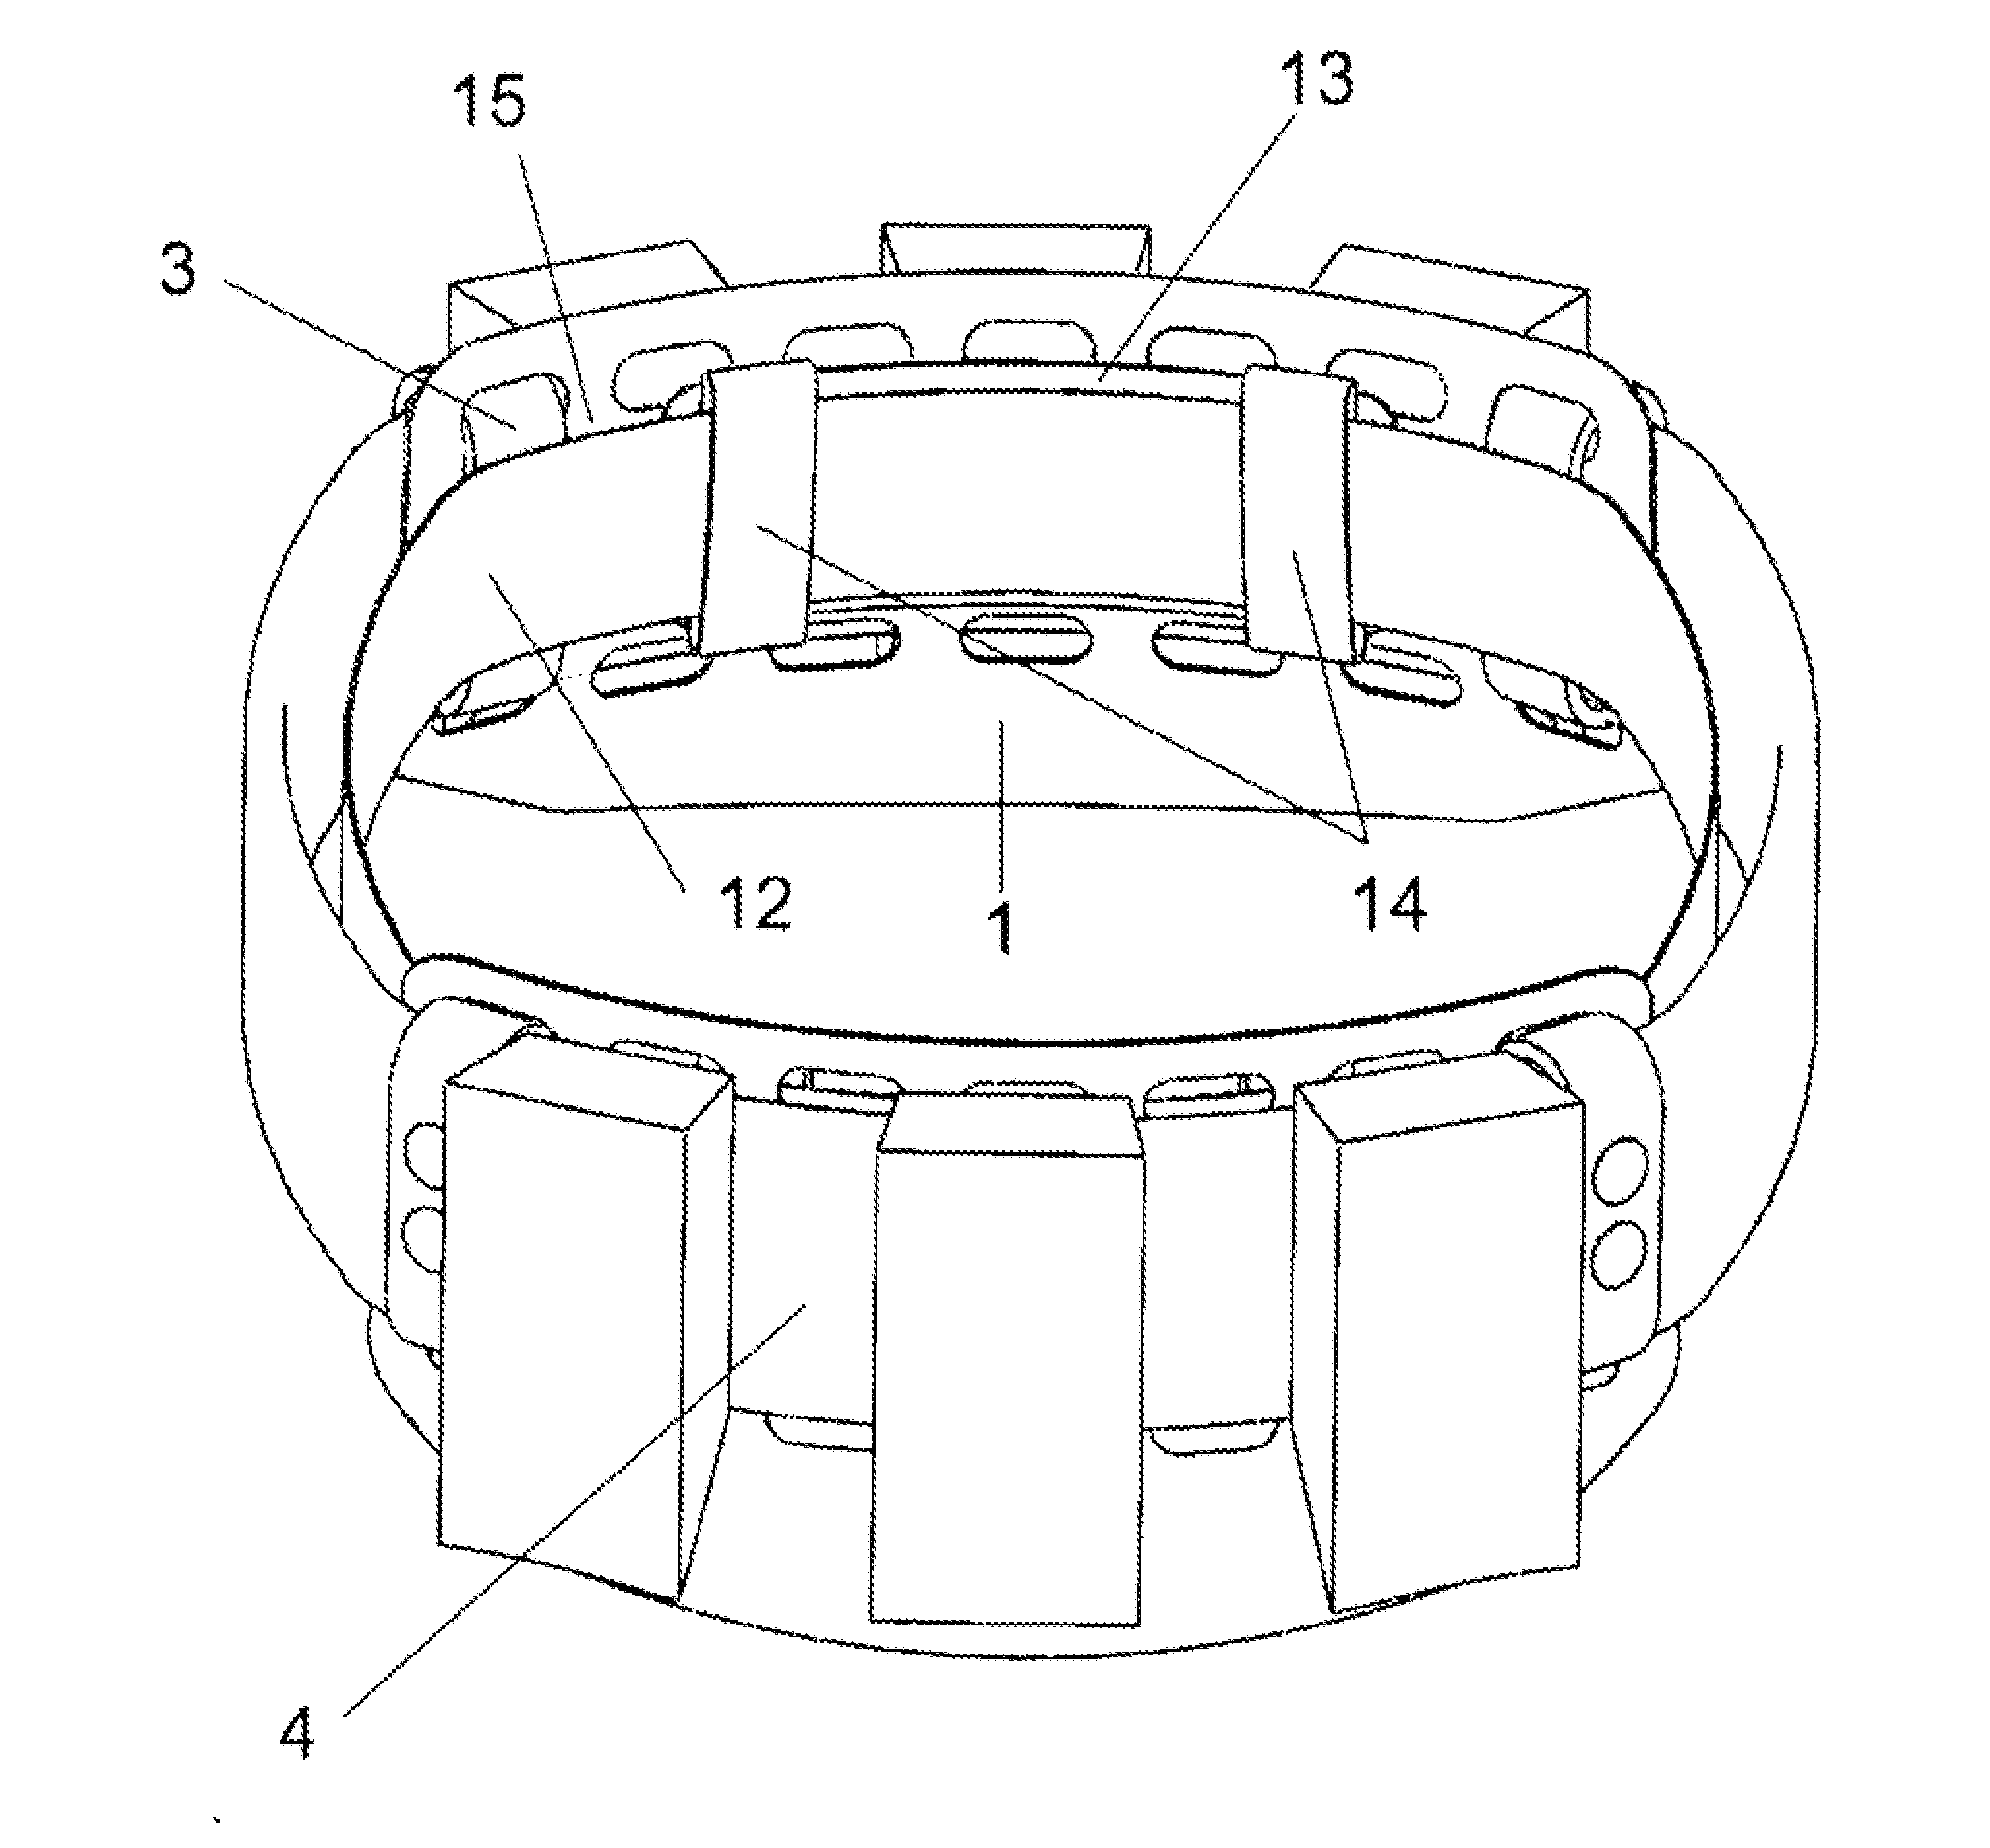 Load bearing devices for human load bearing usages